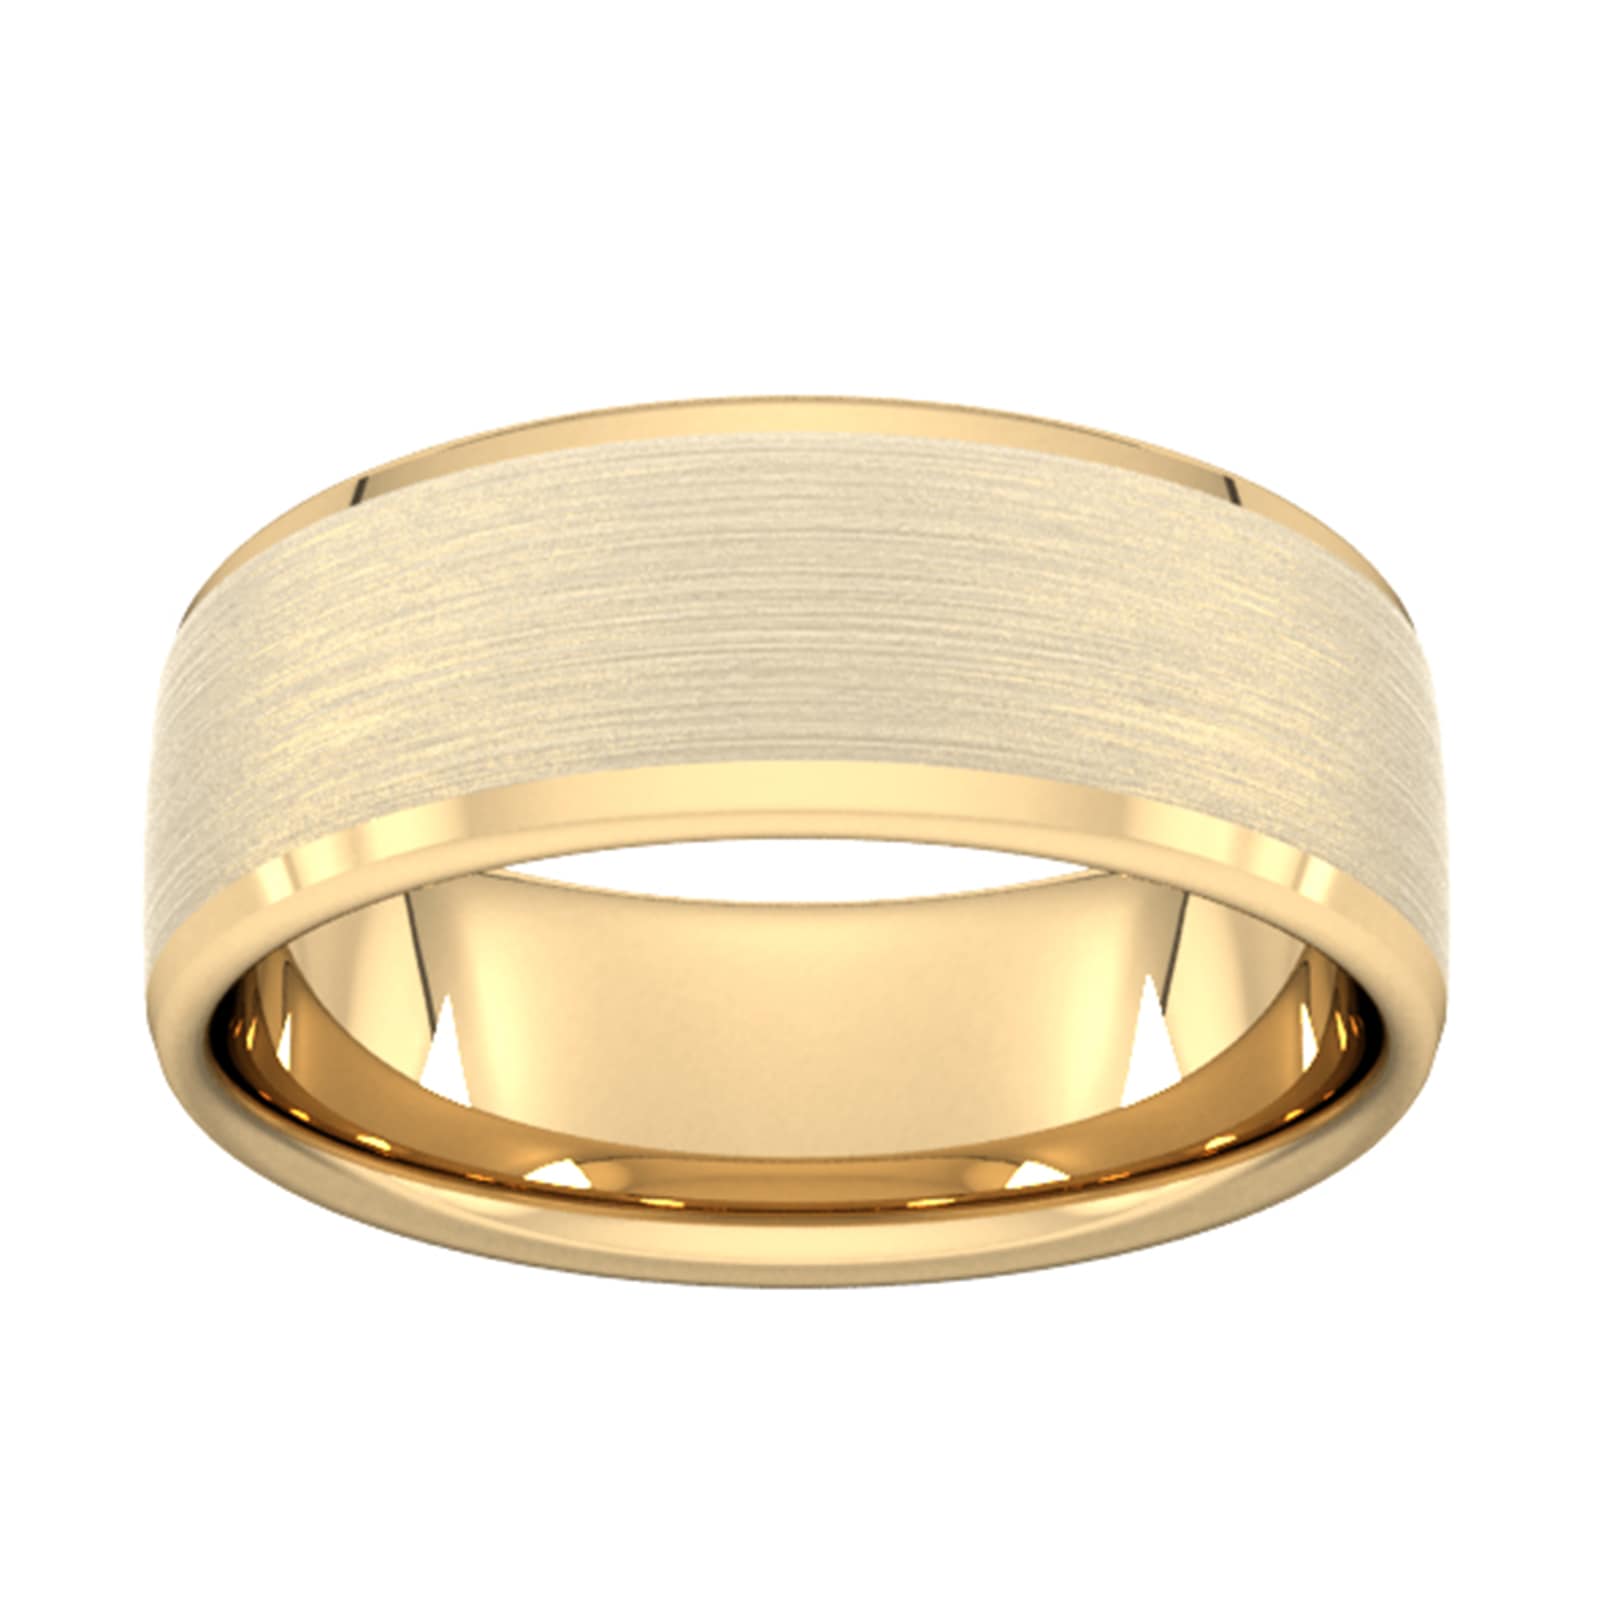 8mm D Shape Standard Polished Chamfered Edges With Matt Centre Wedding Ring In 18 Carat Yellow Gold - Ring Size W